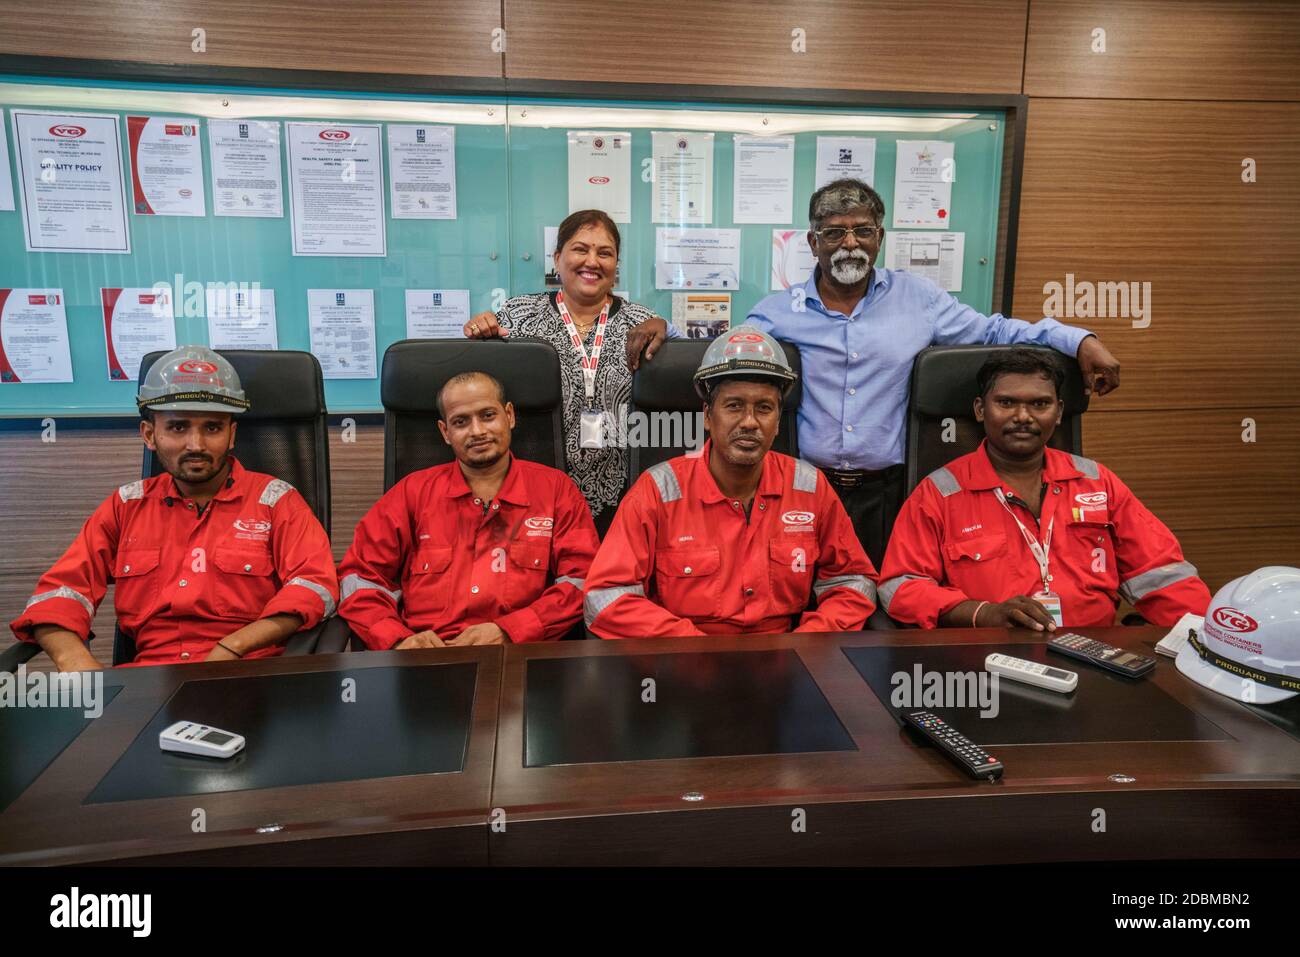 Major Ramasamy Menon and his wife Vejaletchimie Chinnayah at the board room of VG Metal Technology Sdn Bhd with their favourite workers. Malaysia. Stock Photo